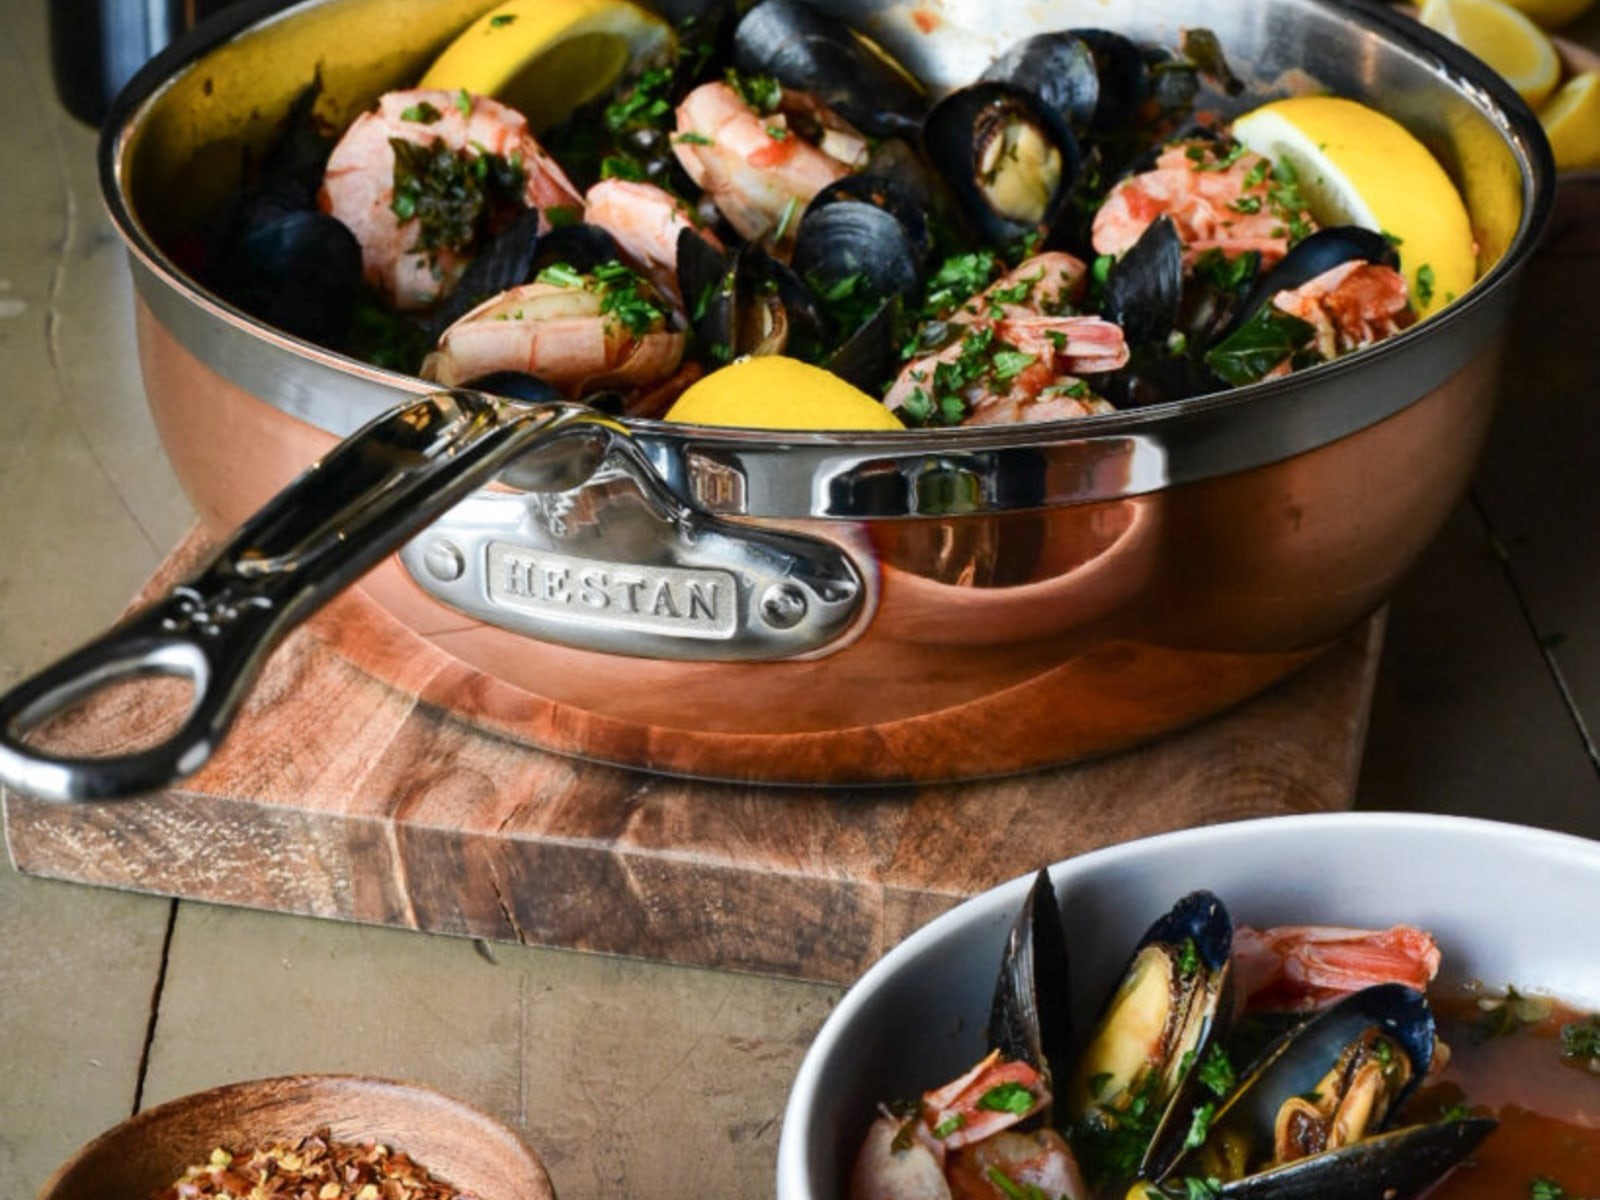 Cast Iron Seafood and Mussel Pot with Lid, 2 1/2-Qt.